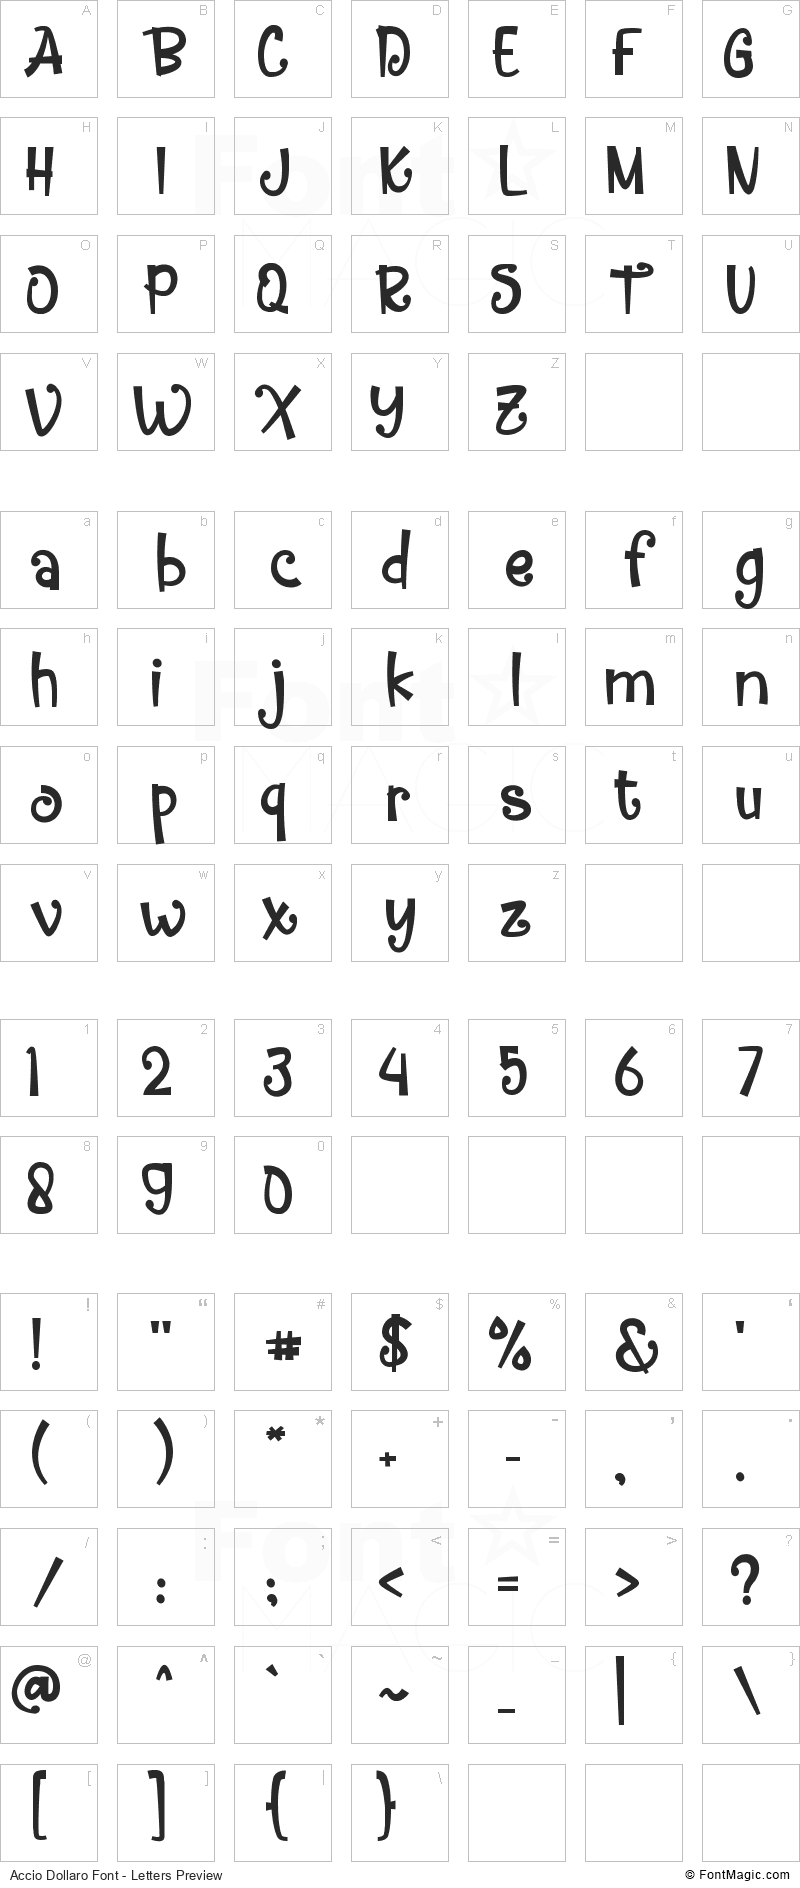 Accio Dollaro Font - All Latters Preview Chart